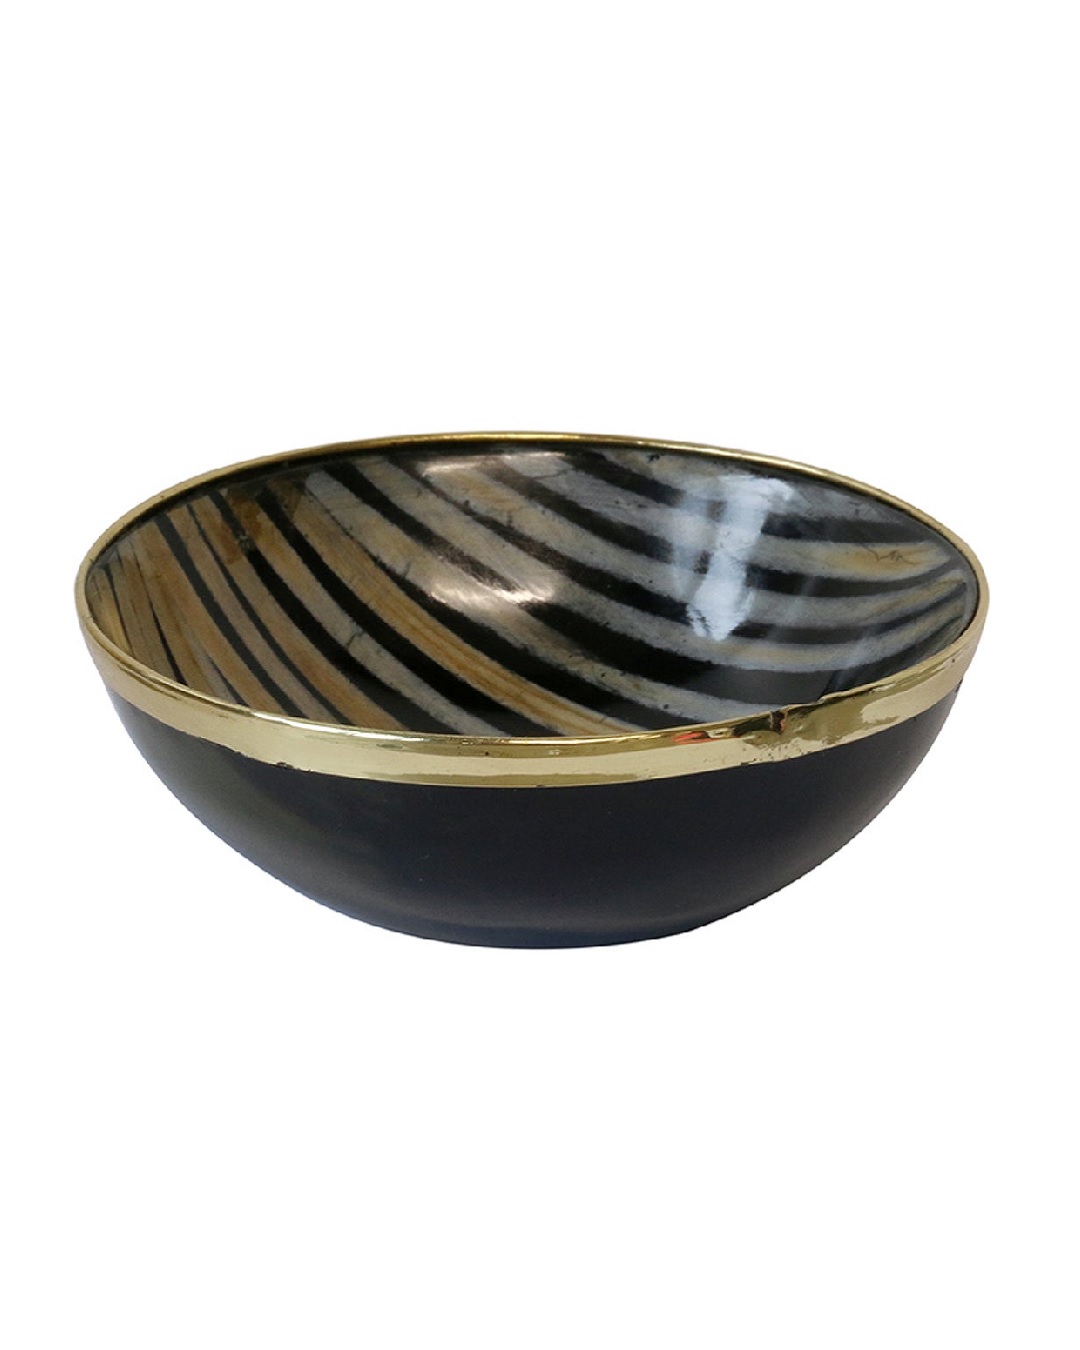 Bombay horn with silver rim bowl